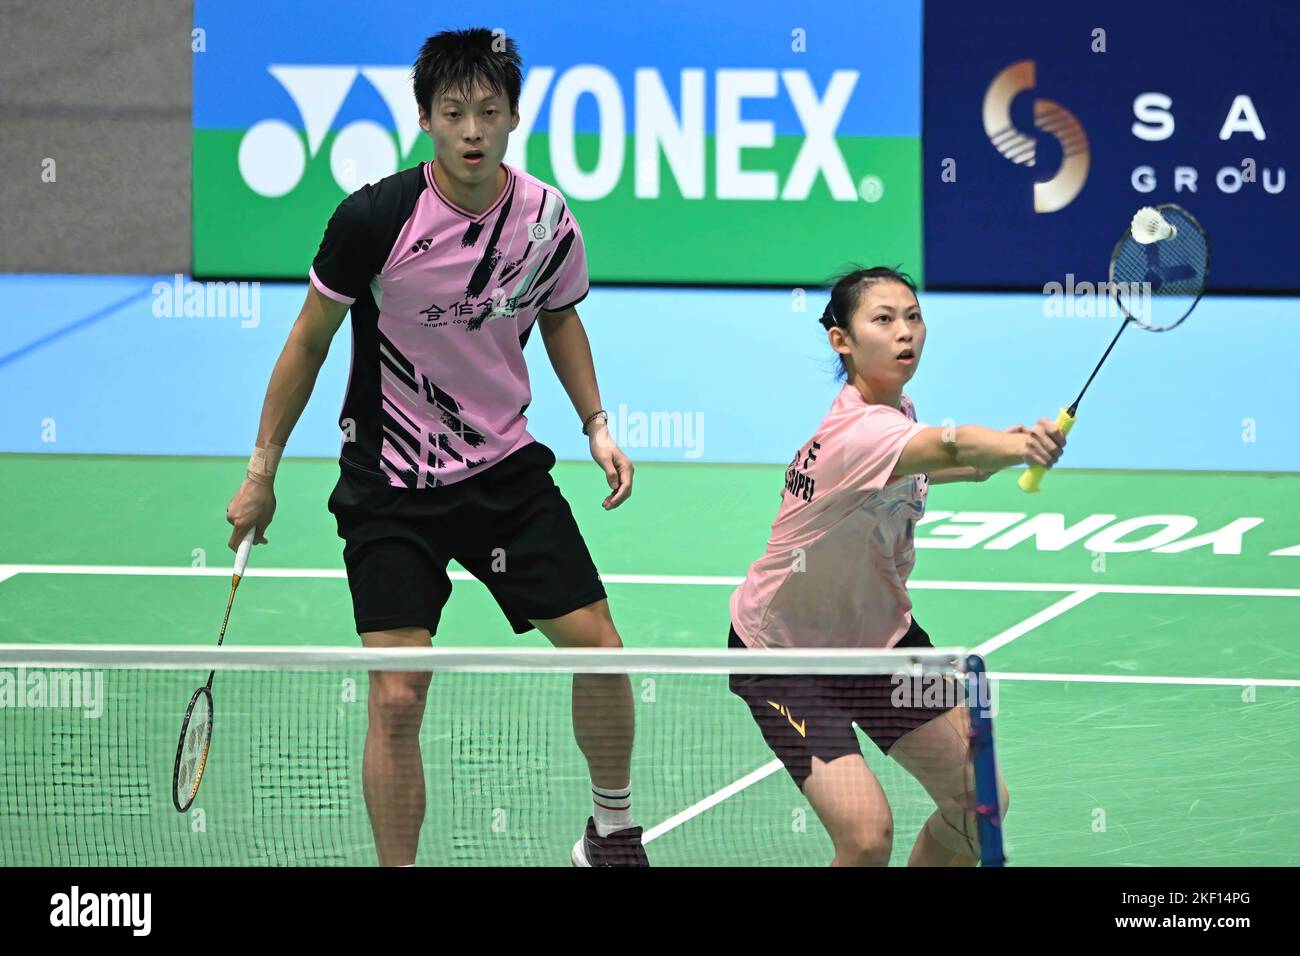 Sydney, Australia. 15th Nov, 2022. Yang Po-Hsuan (L) and Hu Ling Fang (R) of Chinese Taipei seen in action during the 2022 SATHIO GROUP Australian Badminton Open mixed doubles match against Kyohei Yamashita and Natsu Saito of Japan. Yang and Hu won the match, 17-21, 21-19, 21-12. Credit: SOPA Images Limited/Alamy Live News Stock Photo